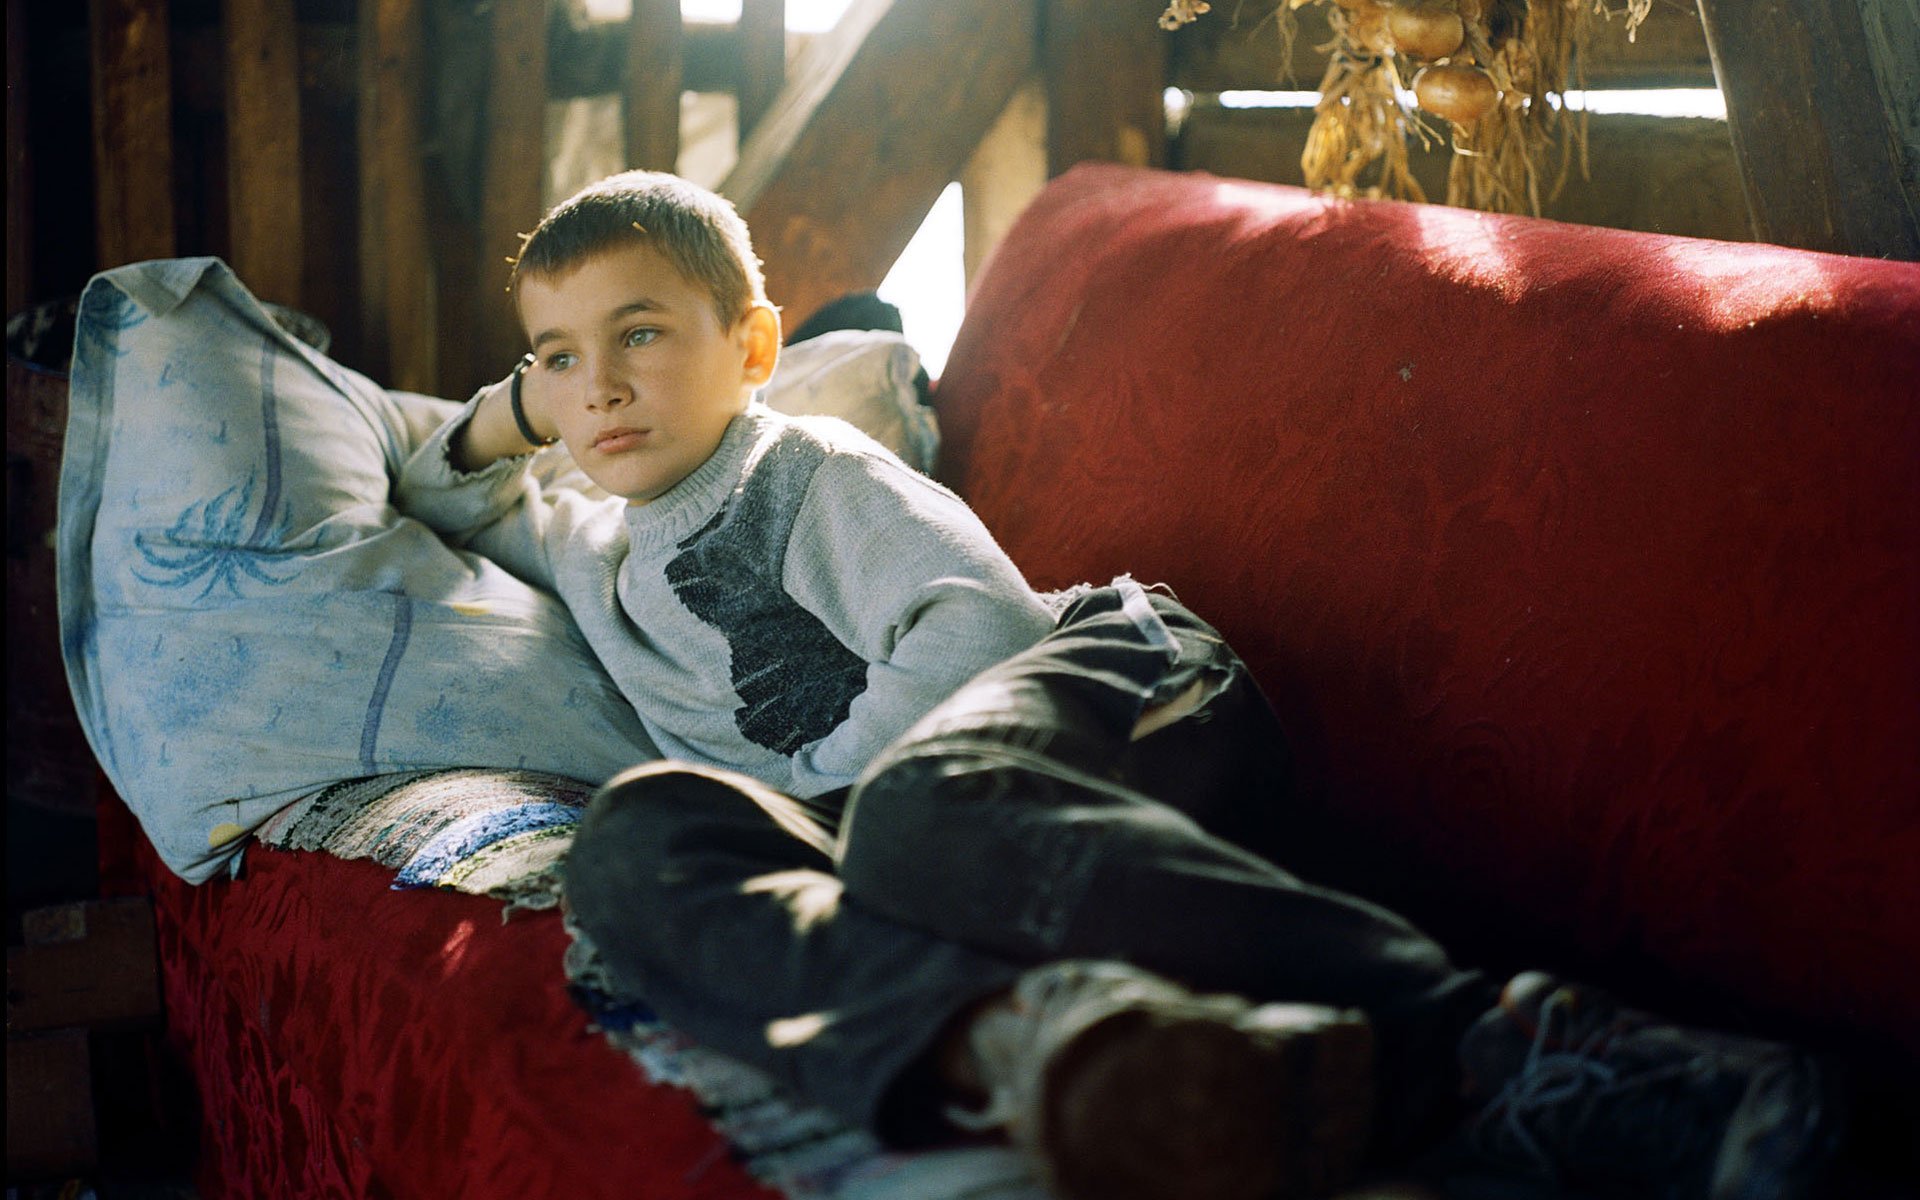 Across the mountains: 6 photographers from the South Caucasus reveal how they see the world